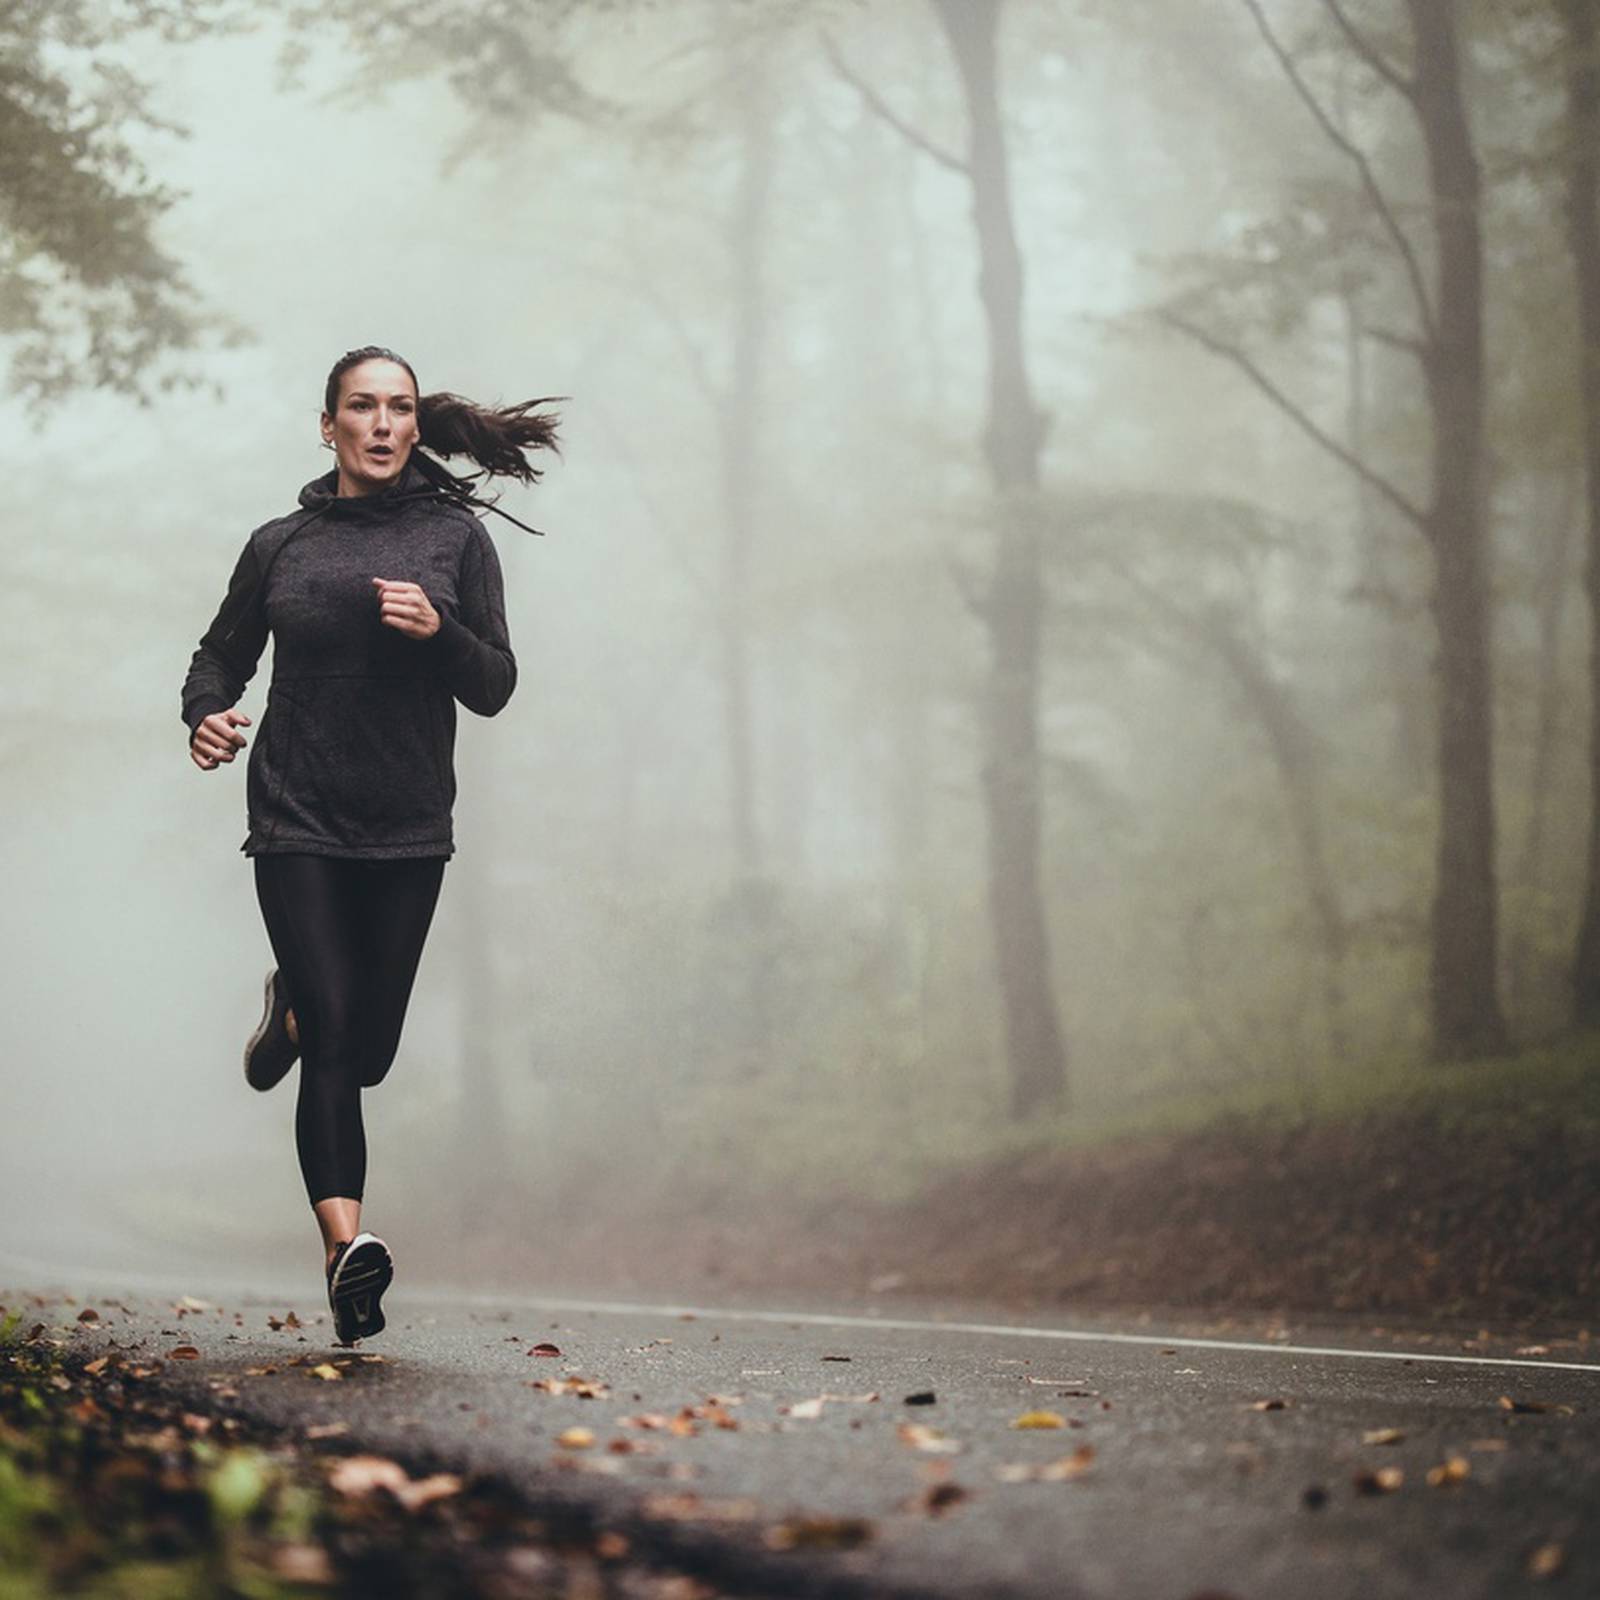 Learn to Love Running - Fun Ways to Get Used to Running